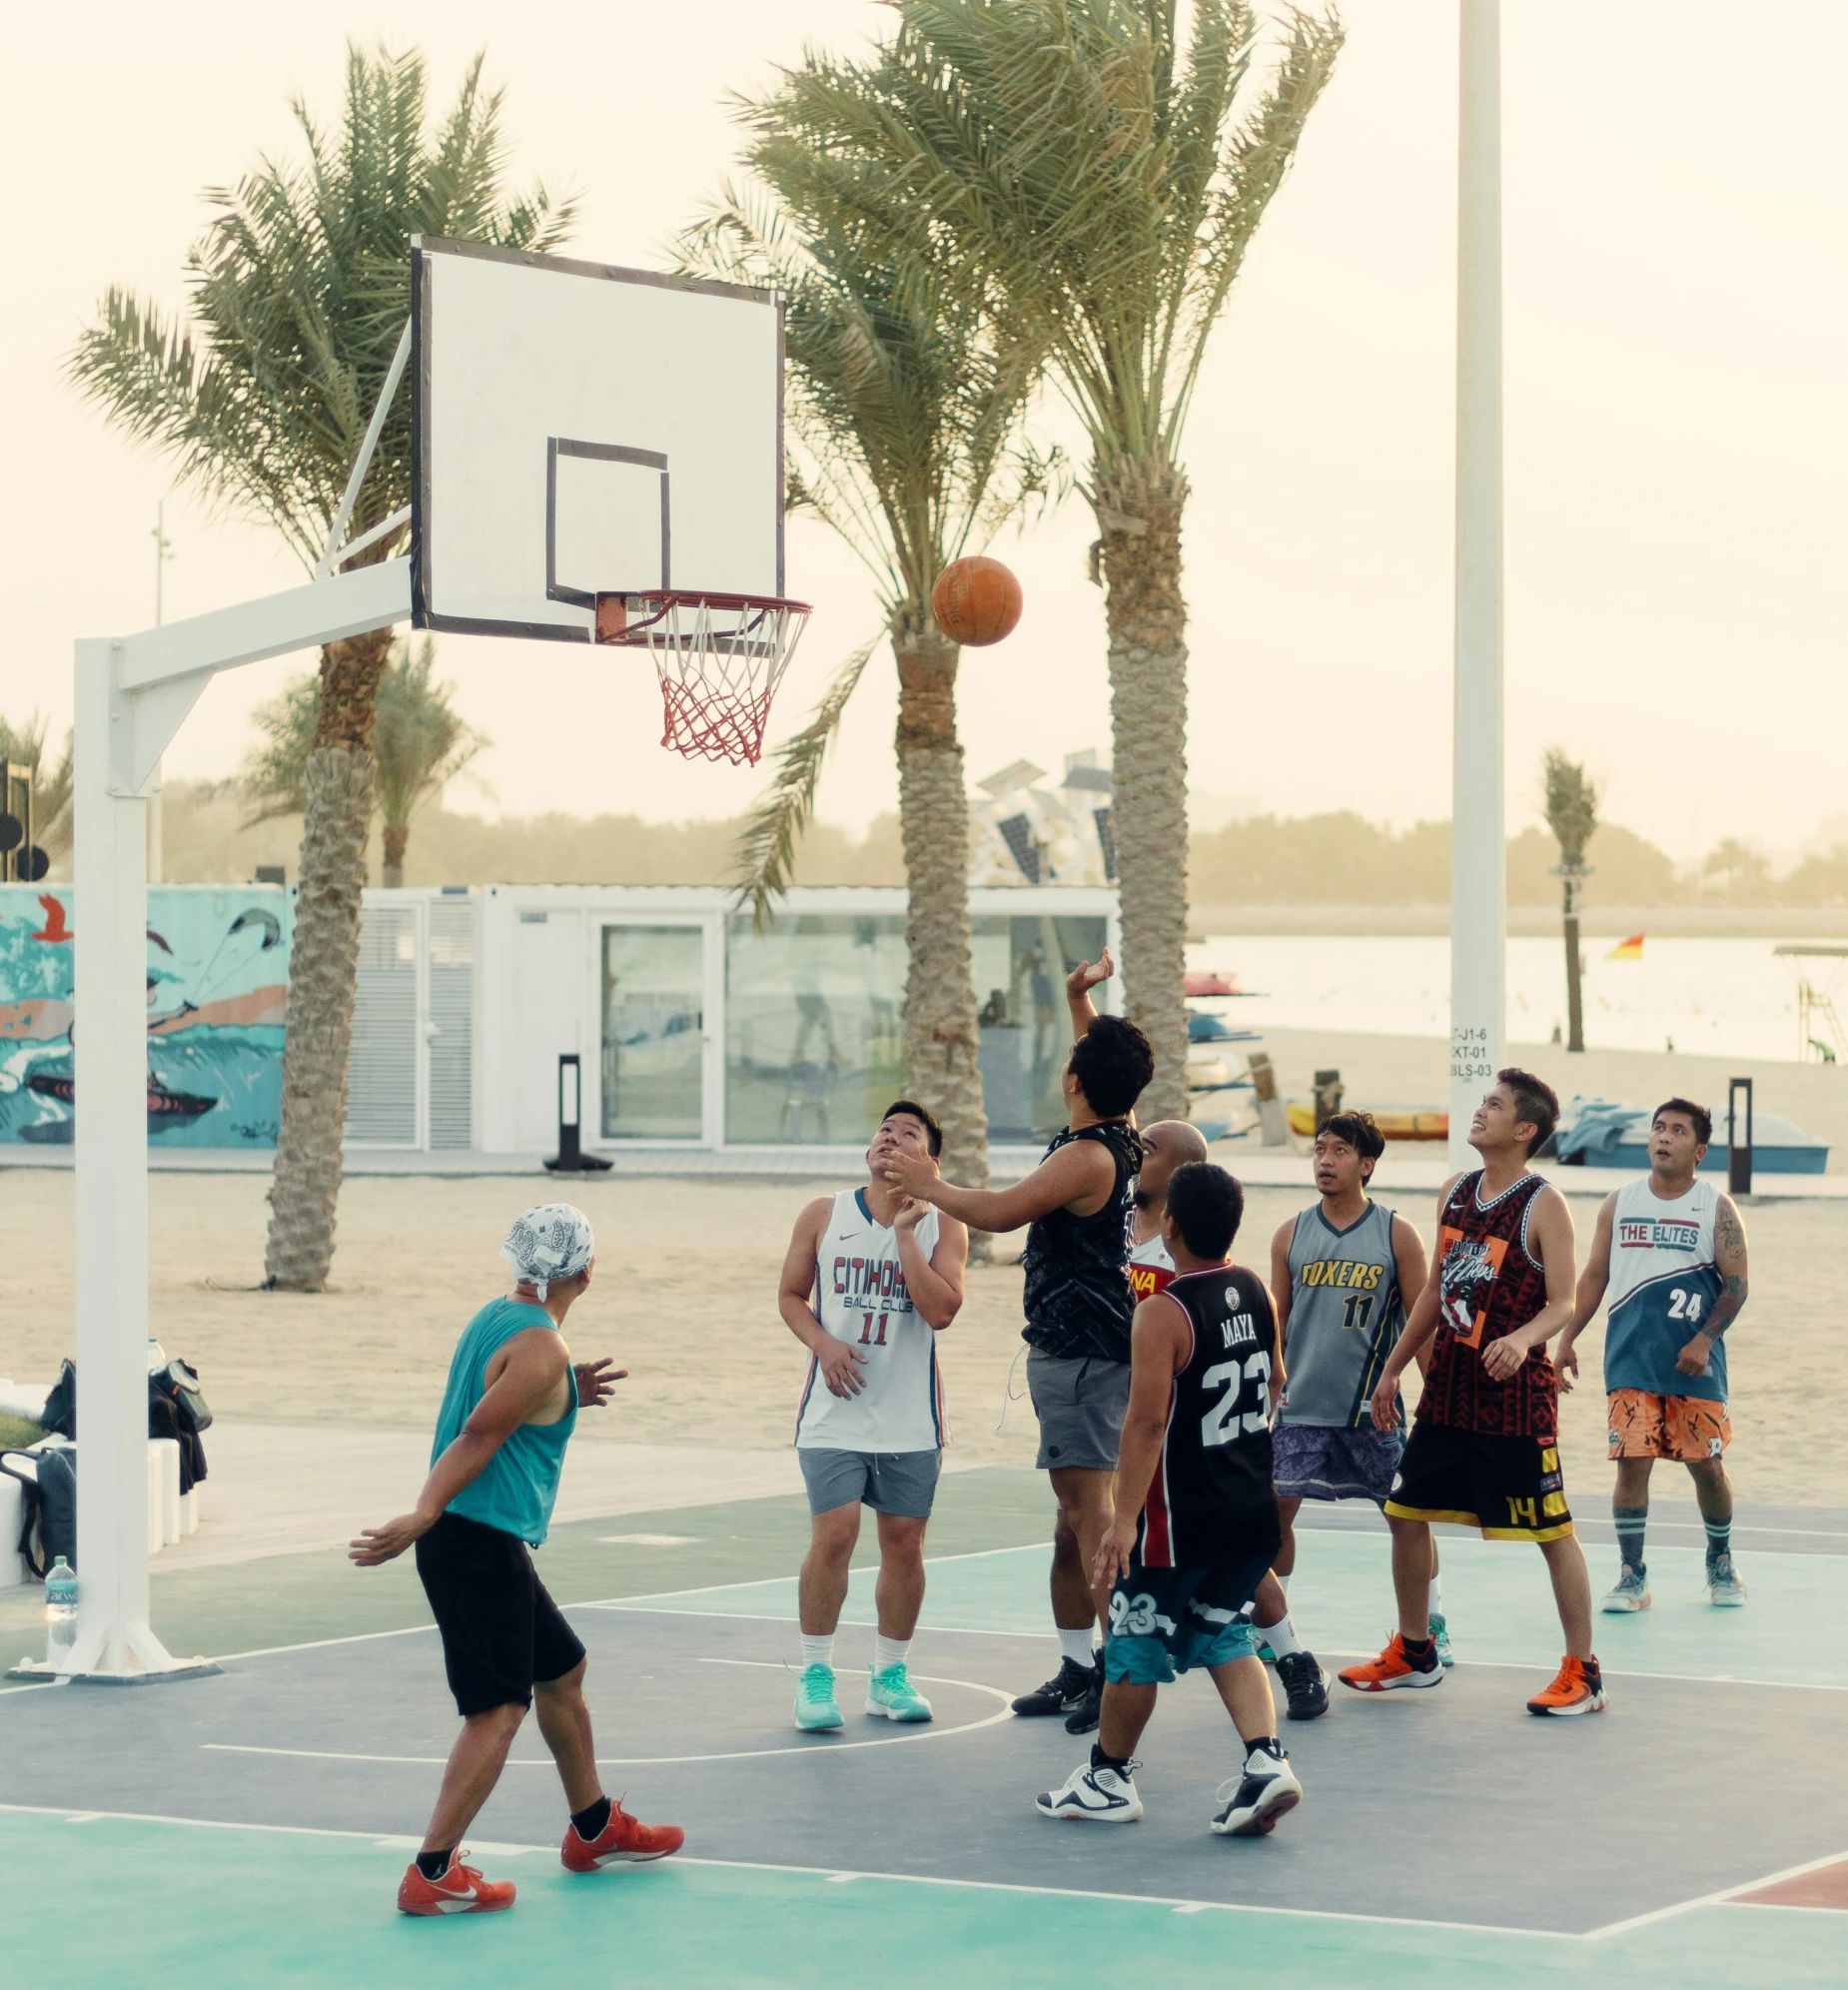 a group of young men playing basketball on a court